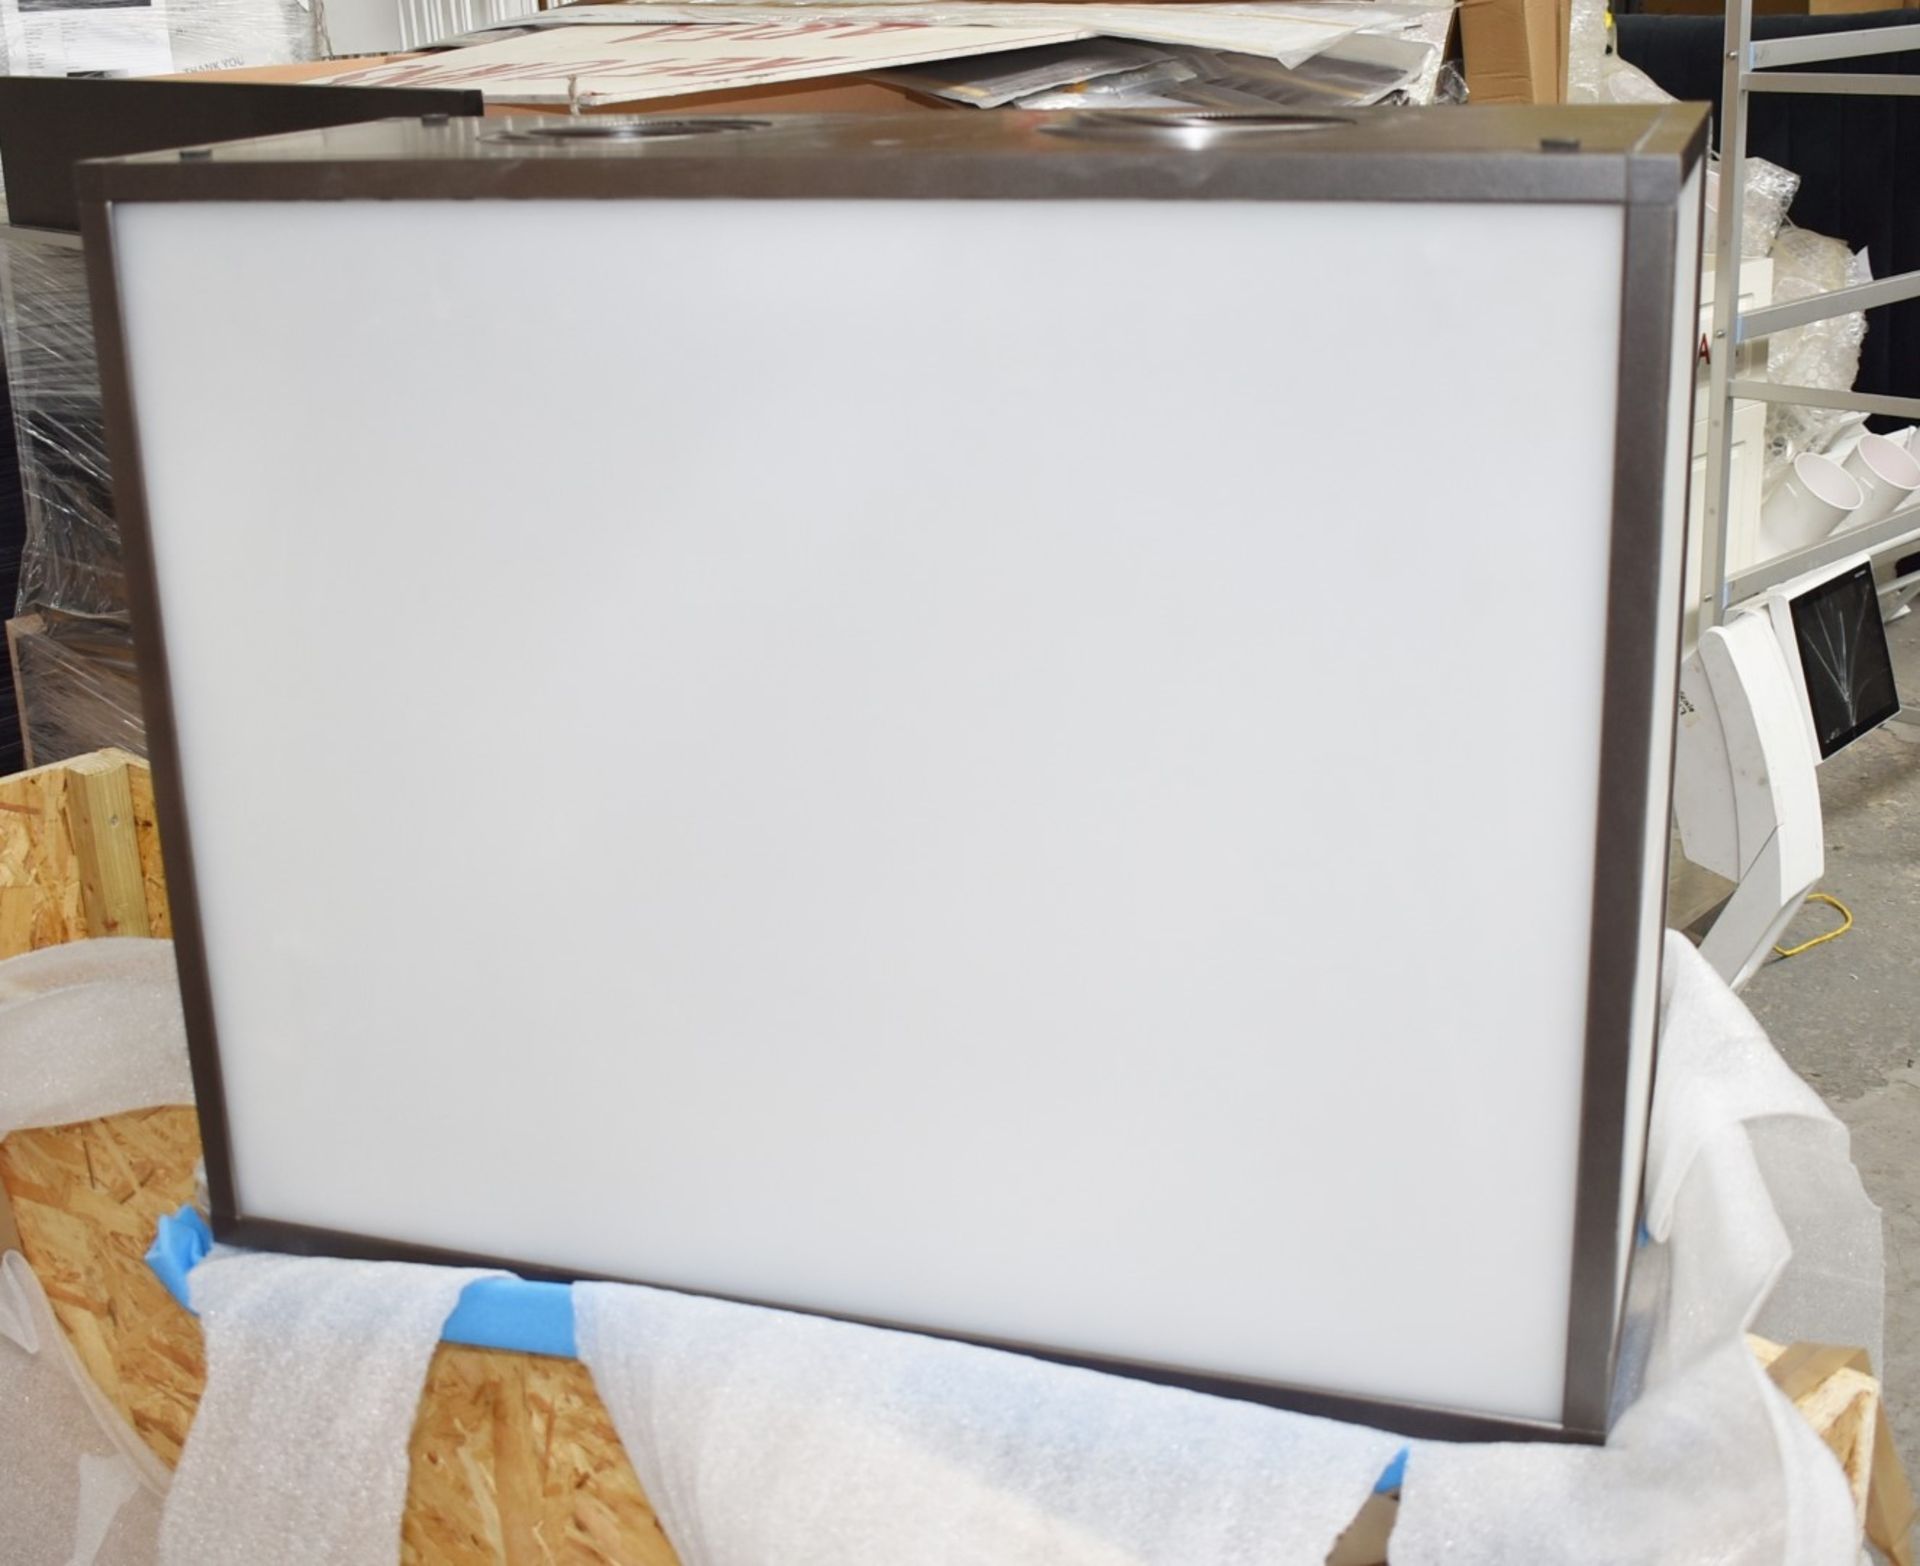 1 x Illuminated Ceiling Light From a Famous London Department Store - 5 Interconnecting Box Lights - Image 4 of 22